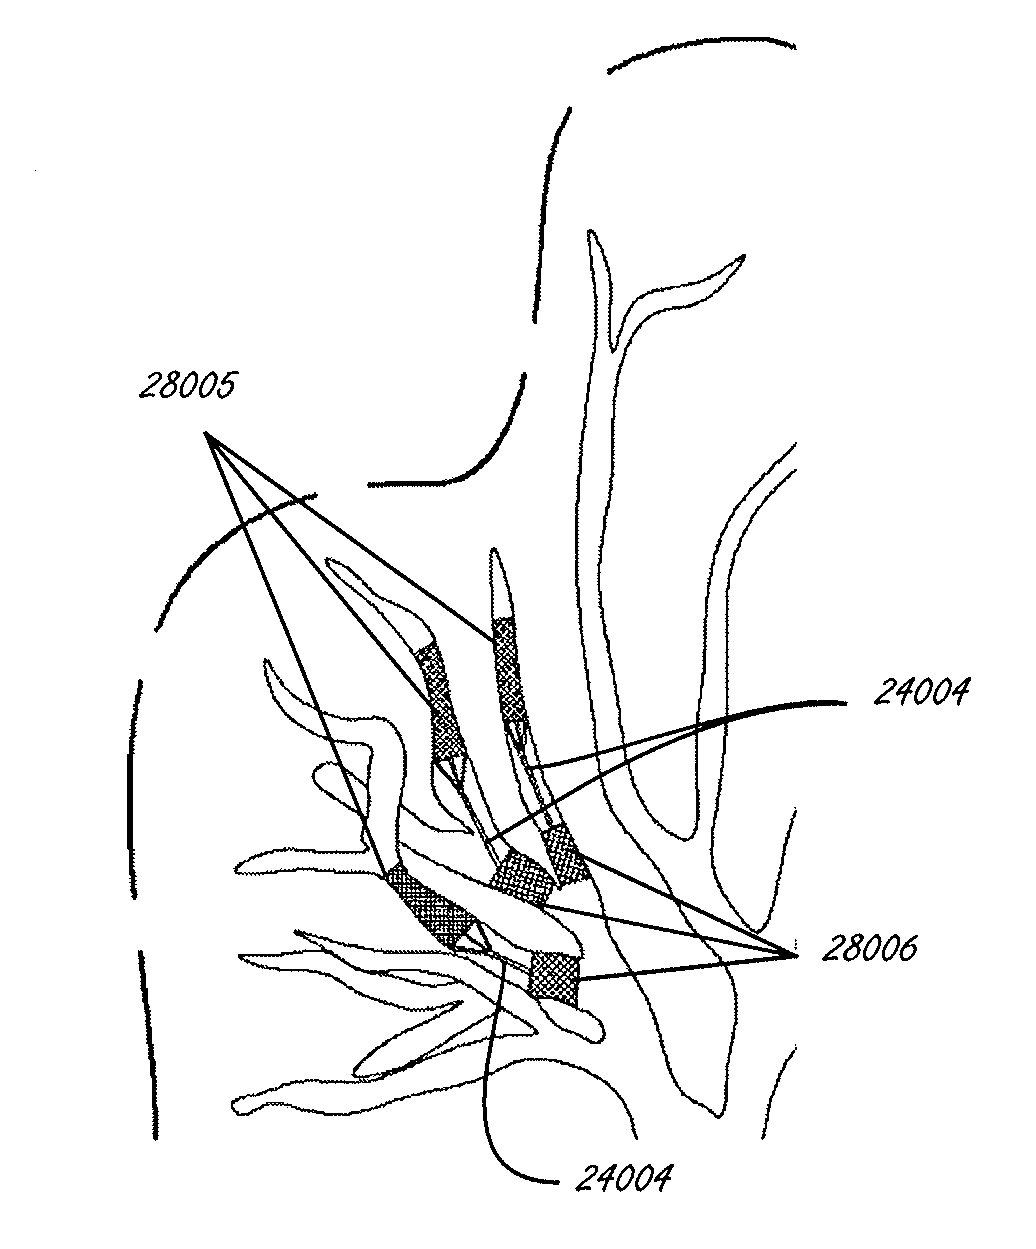 Devices and methods for lung volume reduction